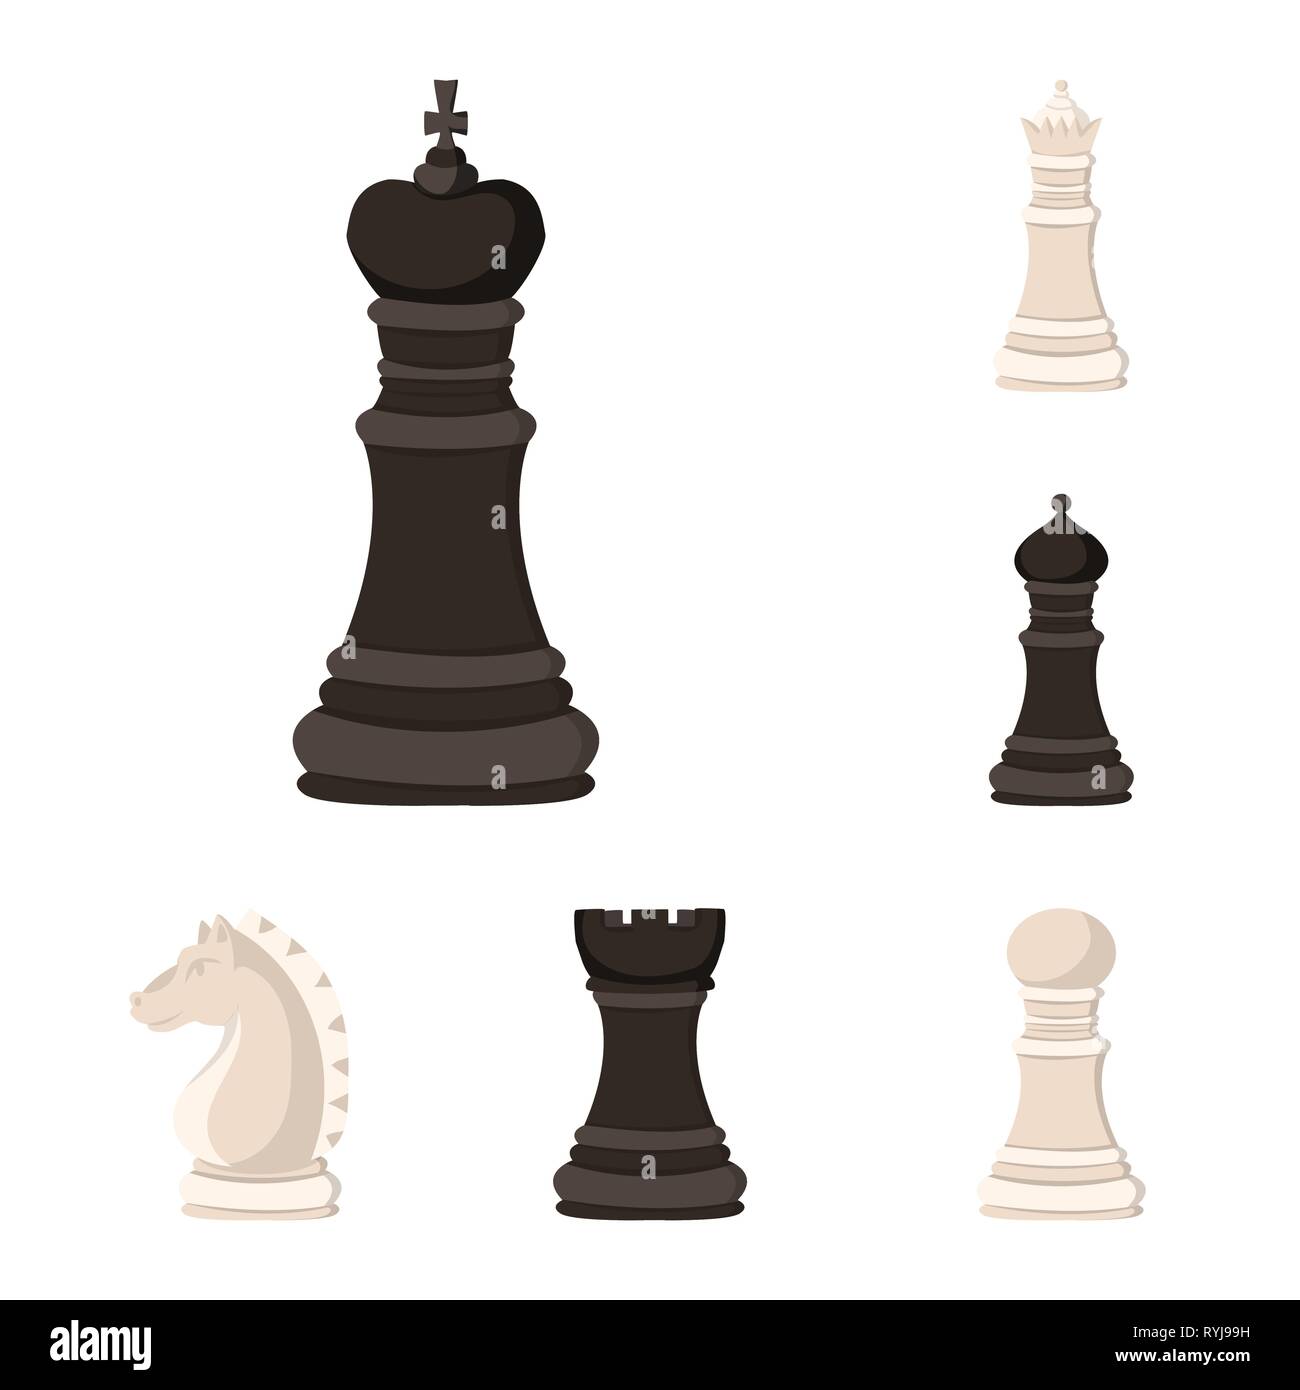 king,queen,bishop,knight,rook,pawn,board,strategic,horse,black,white,championship,castle,business,mate,tower,figure,leadership,check,head,network,counter,leader,change,manager,sport,tournament,goal,chess,game,piece,strategy,tactical,play,checkmate,thin,club,target,set,vector,icon,illustration,isolated,collection,design,element,graphic,sign,cartoon,color Vector Vectors , Stock Vector